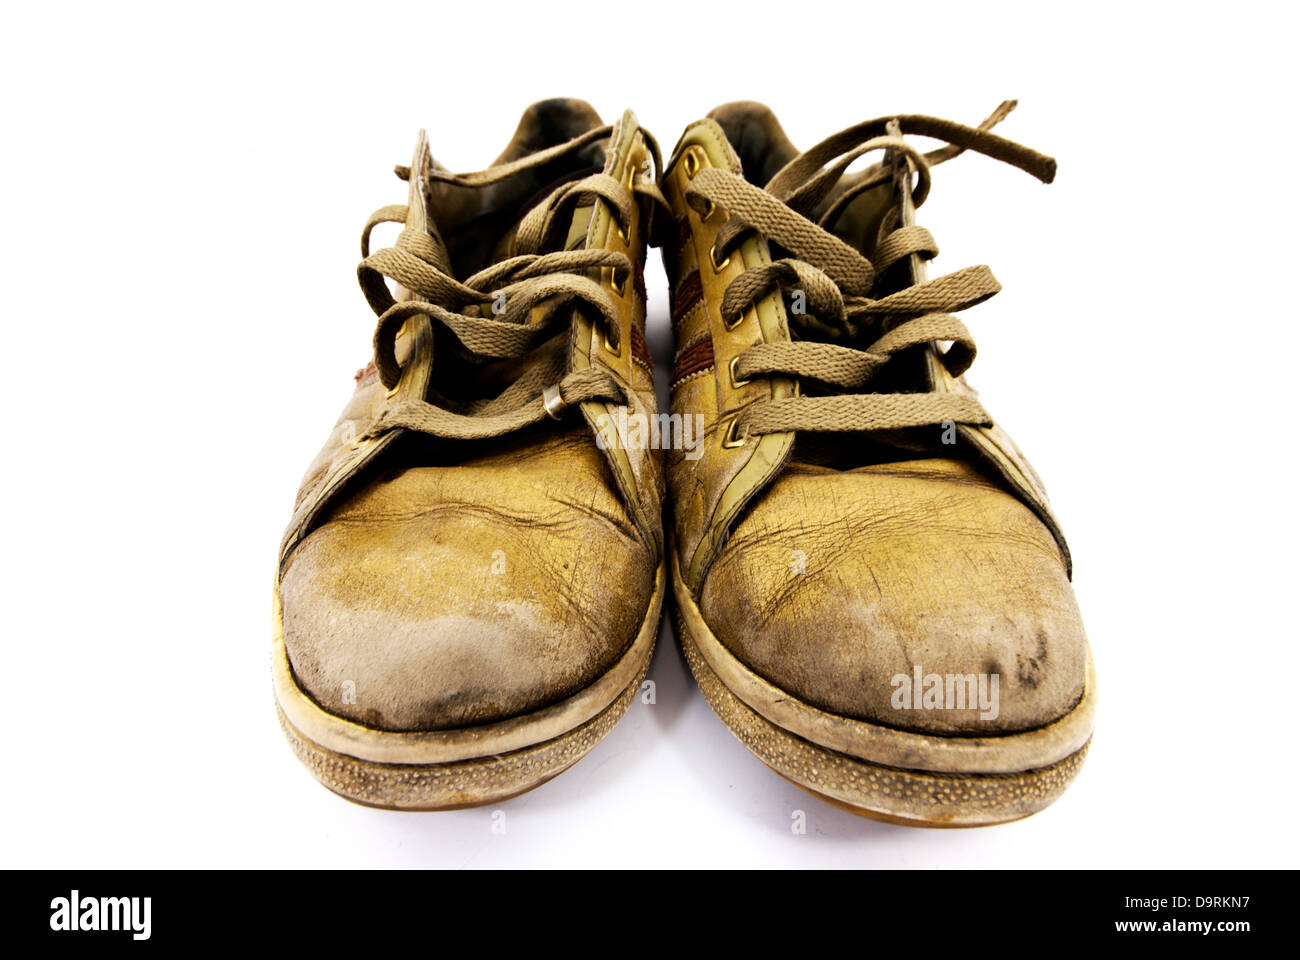 closeup of a pair of worn sneakers Stock Photo